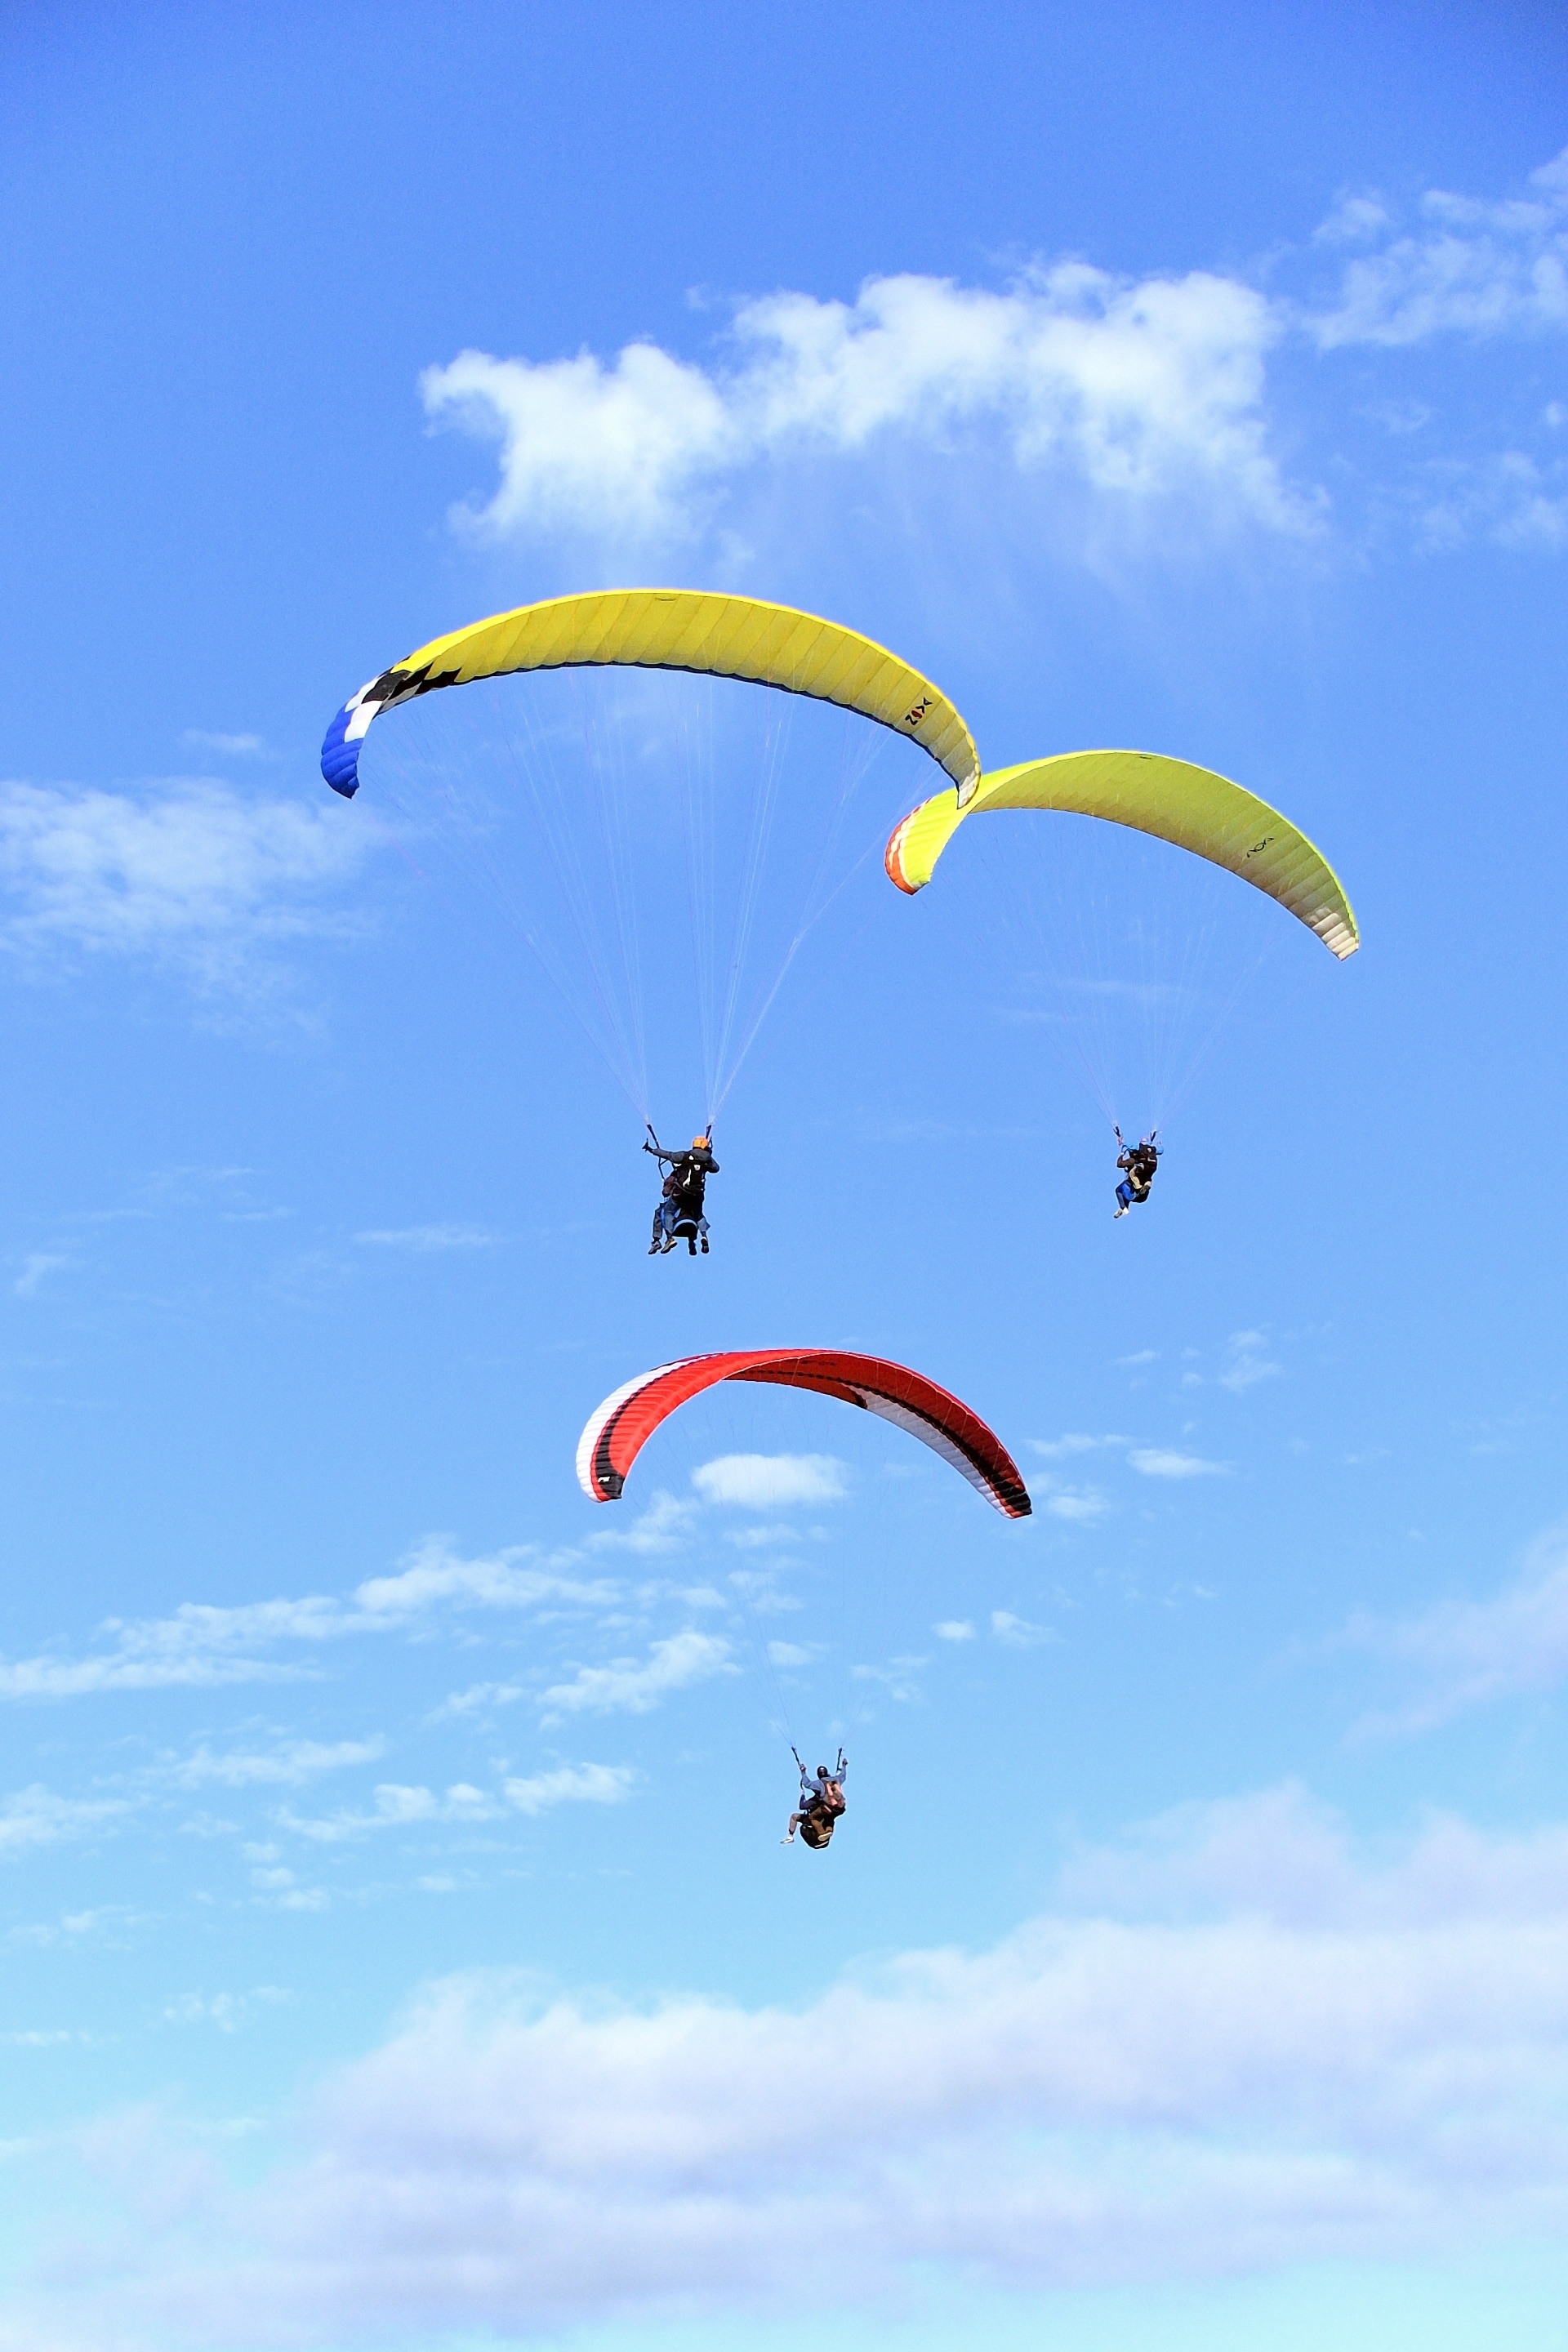 3 paragliders in the air